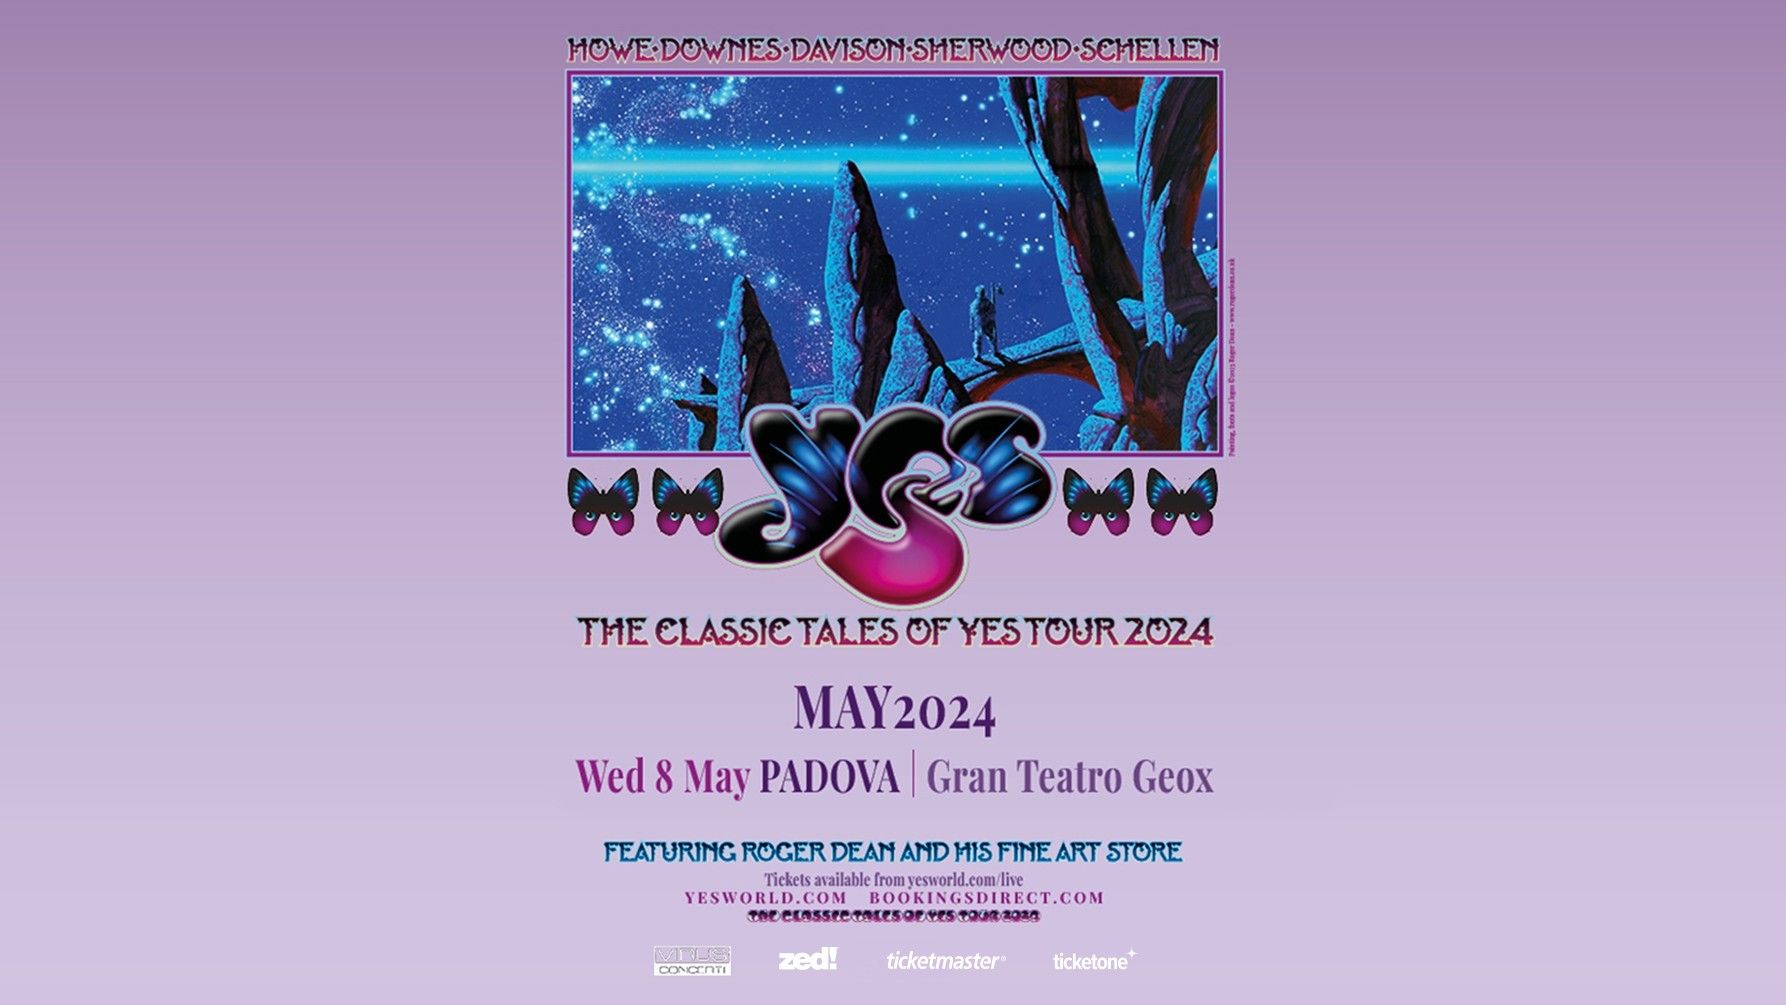 Yes "The Classic Tales of Yes Tour 2024"